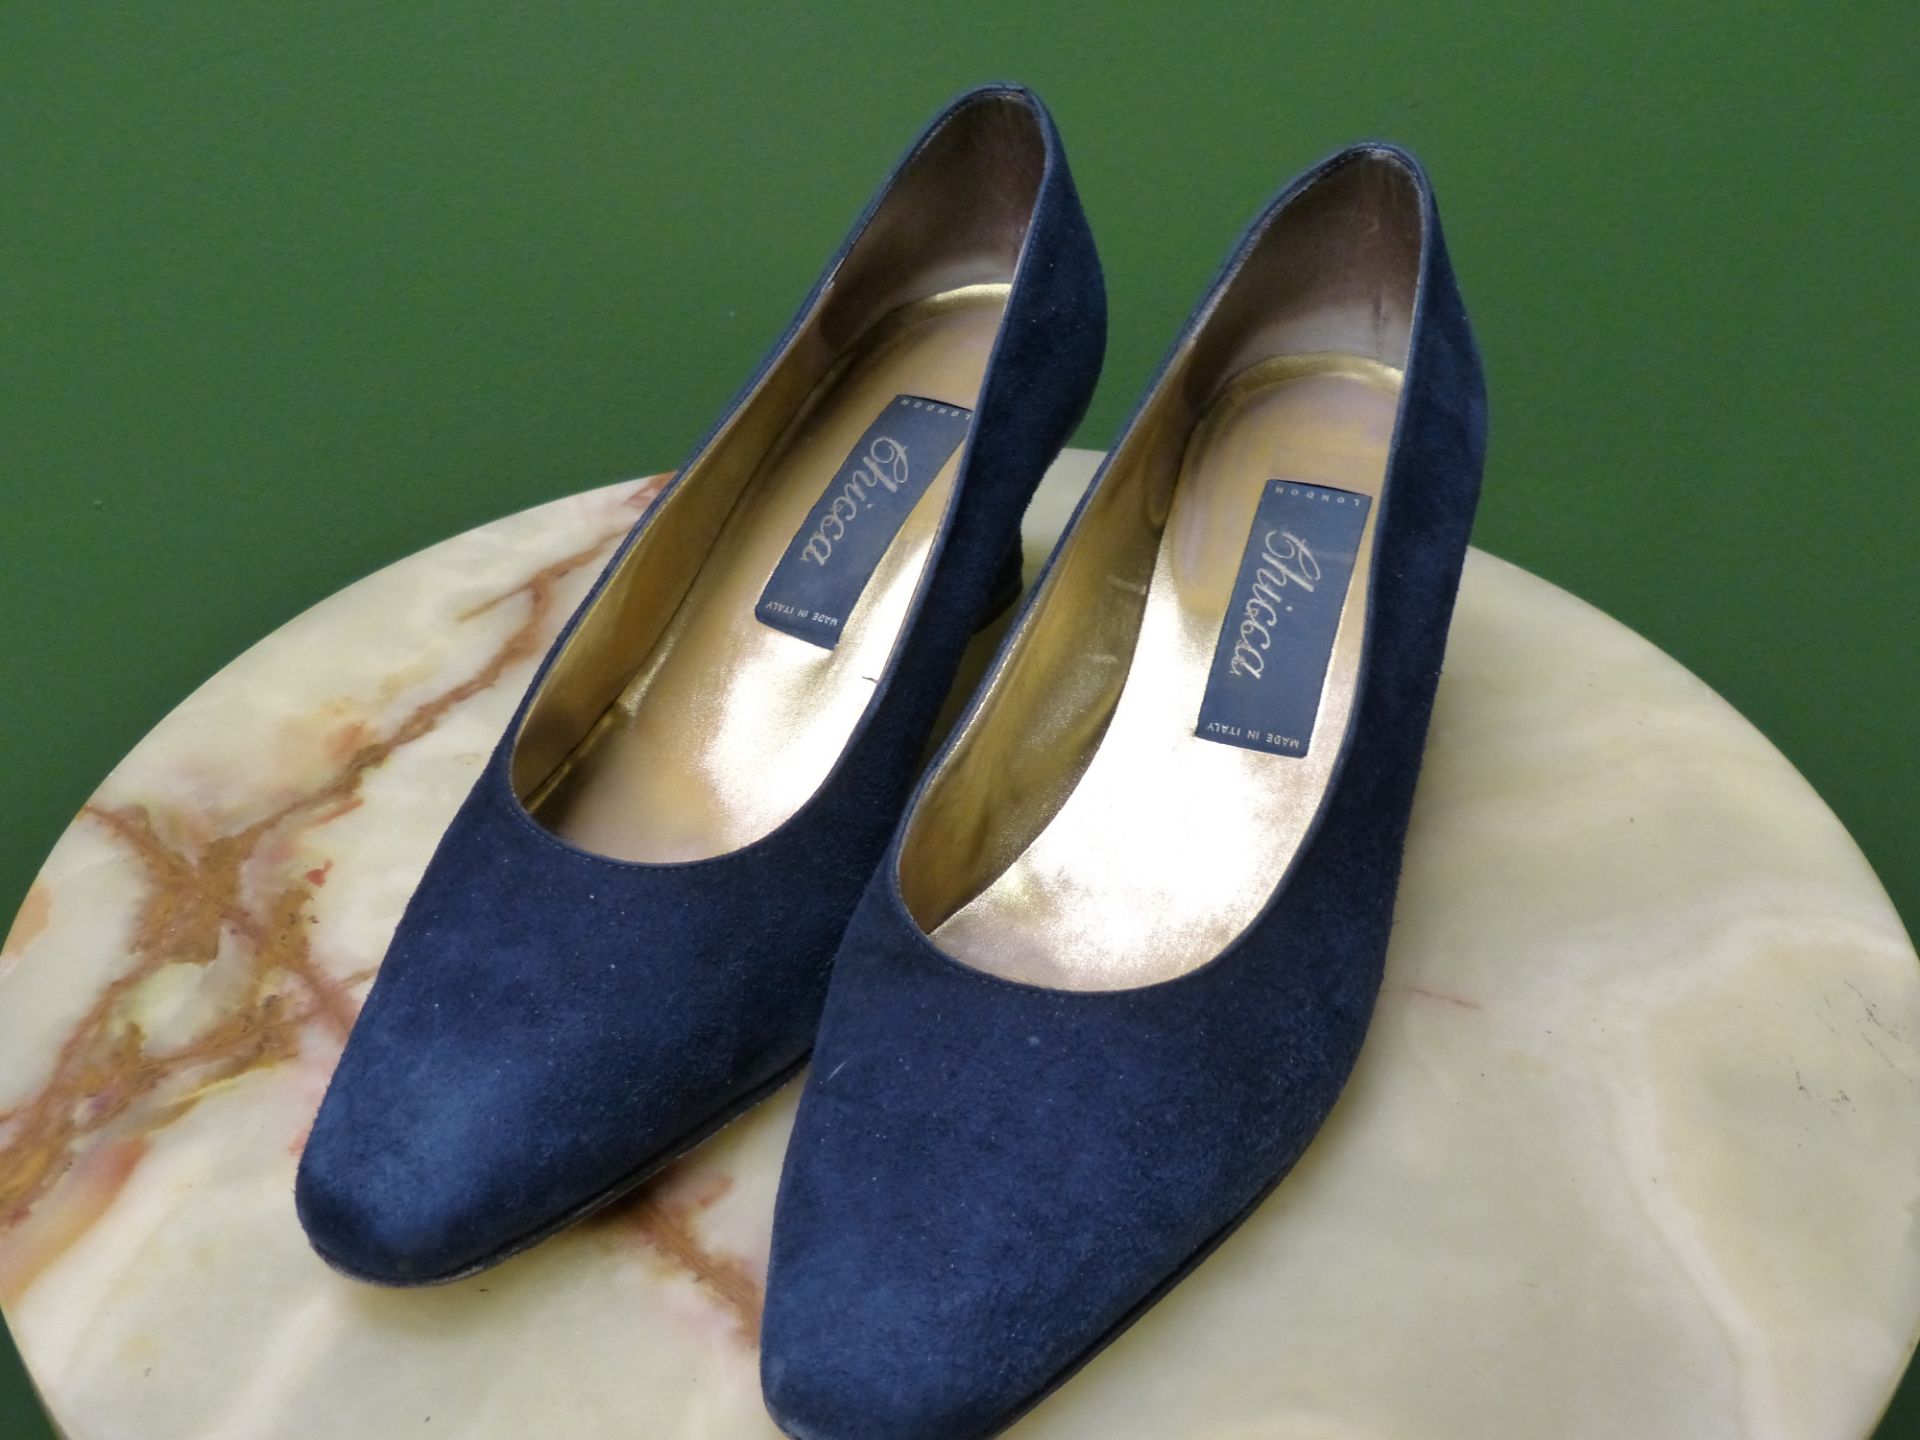 SHOES. SUTOR MANTELLASSI BROWN LEATHER HEALED EUR SIZE 39.5 (BOXED) TOGETHER WITH CHICCA LONDON BLUE - Image 7 of 9